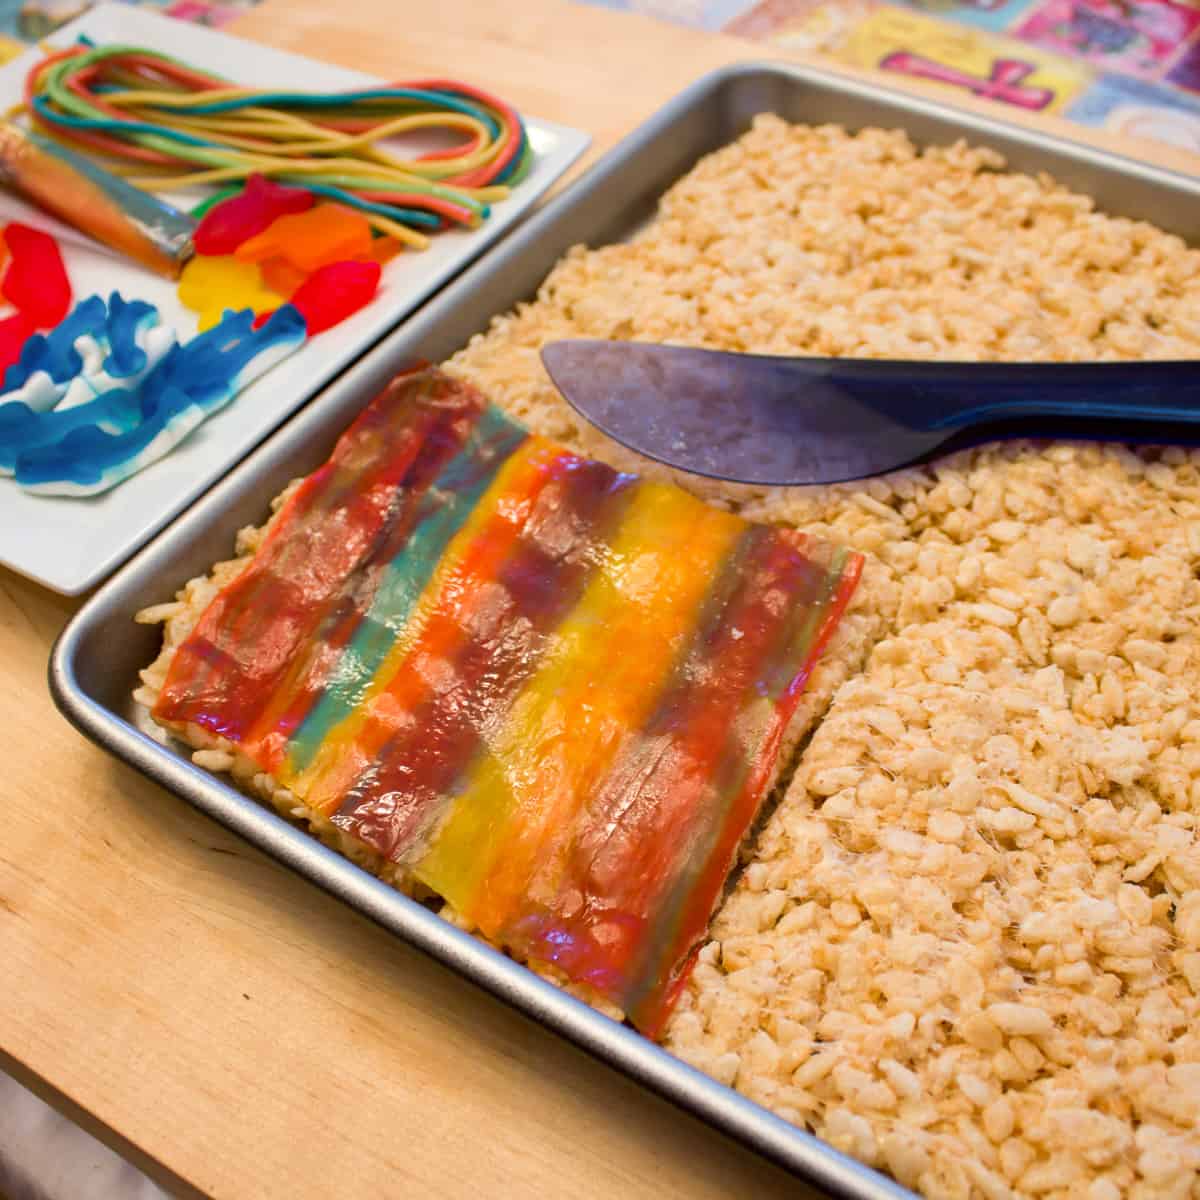 Place a fruit roll up sheet on the rice krispie squares.